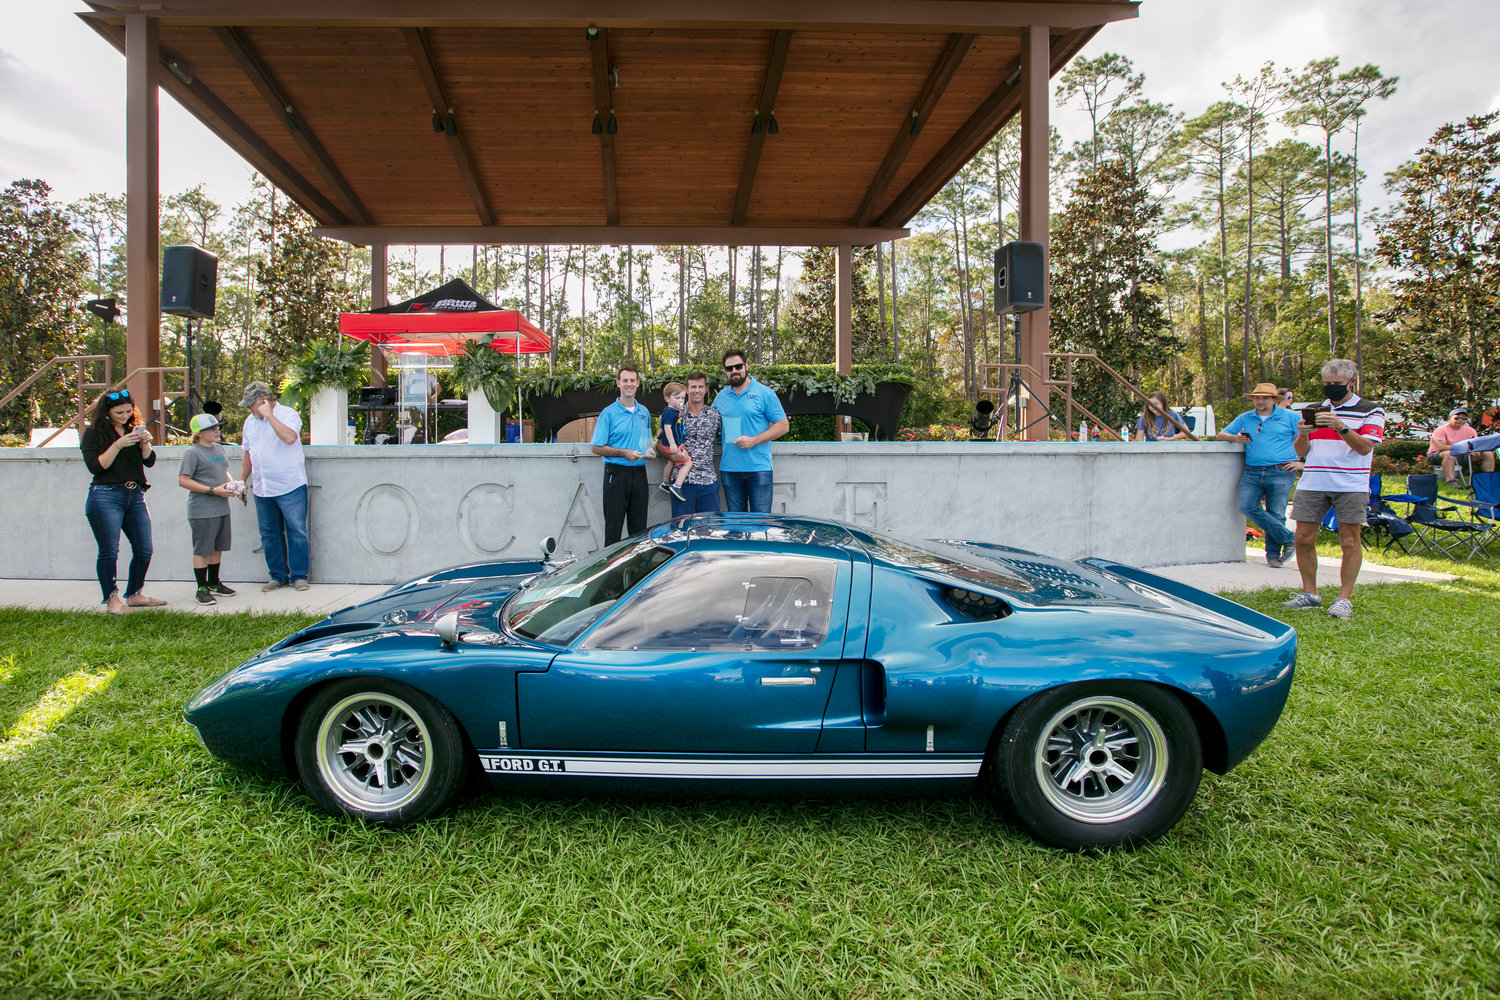 Ponte Vedra Auto Show attracts 200 cars and thousands of fans The